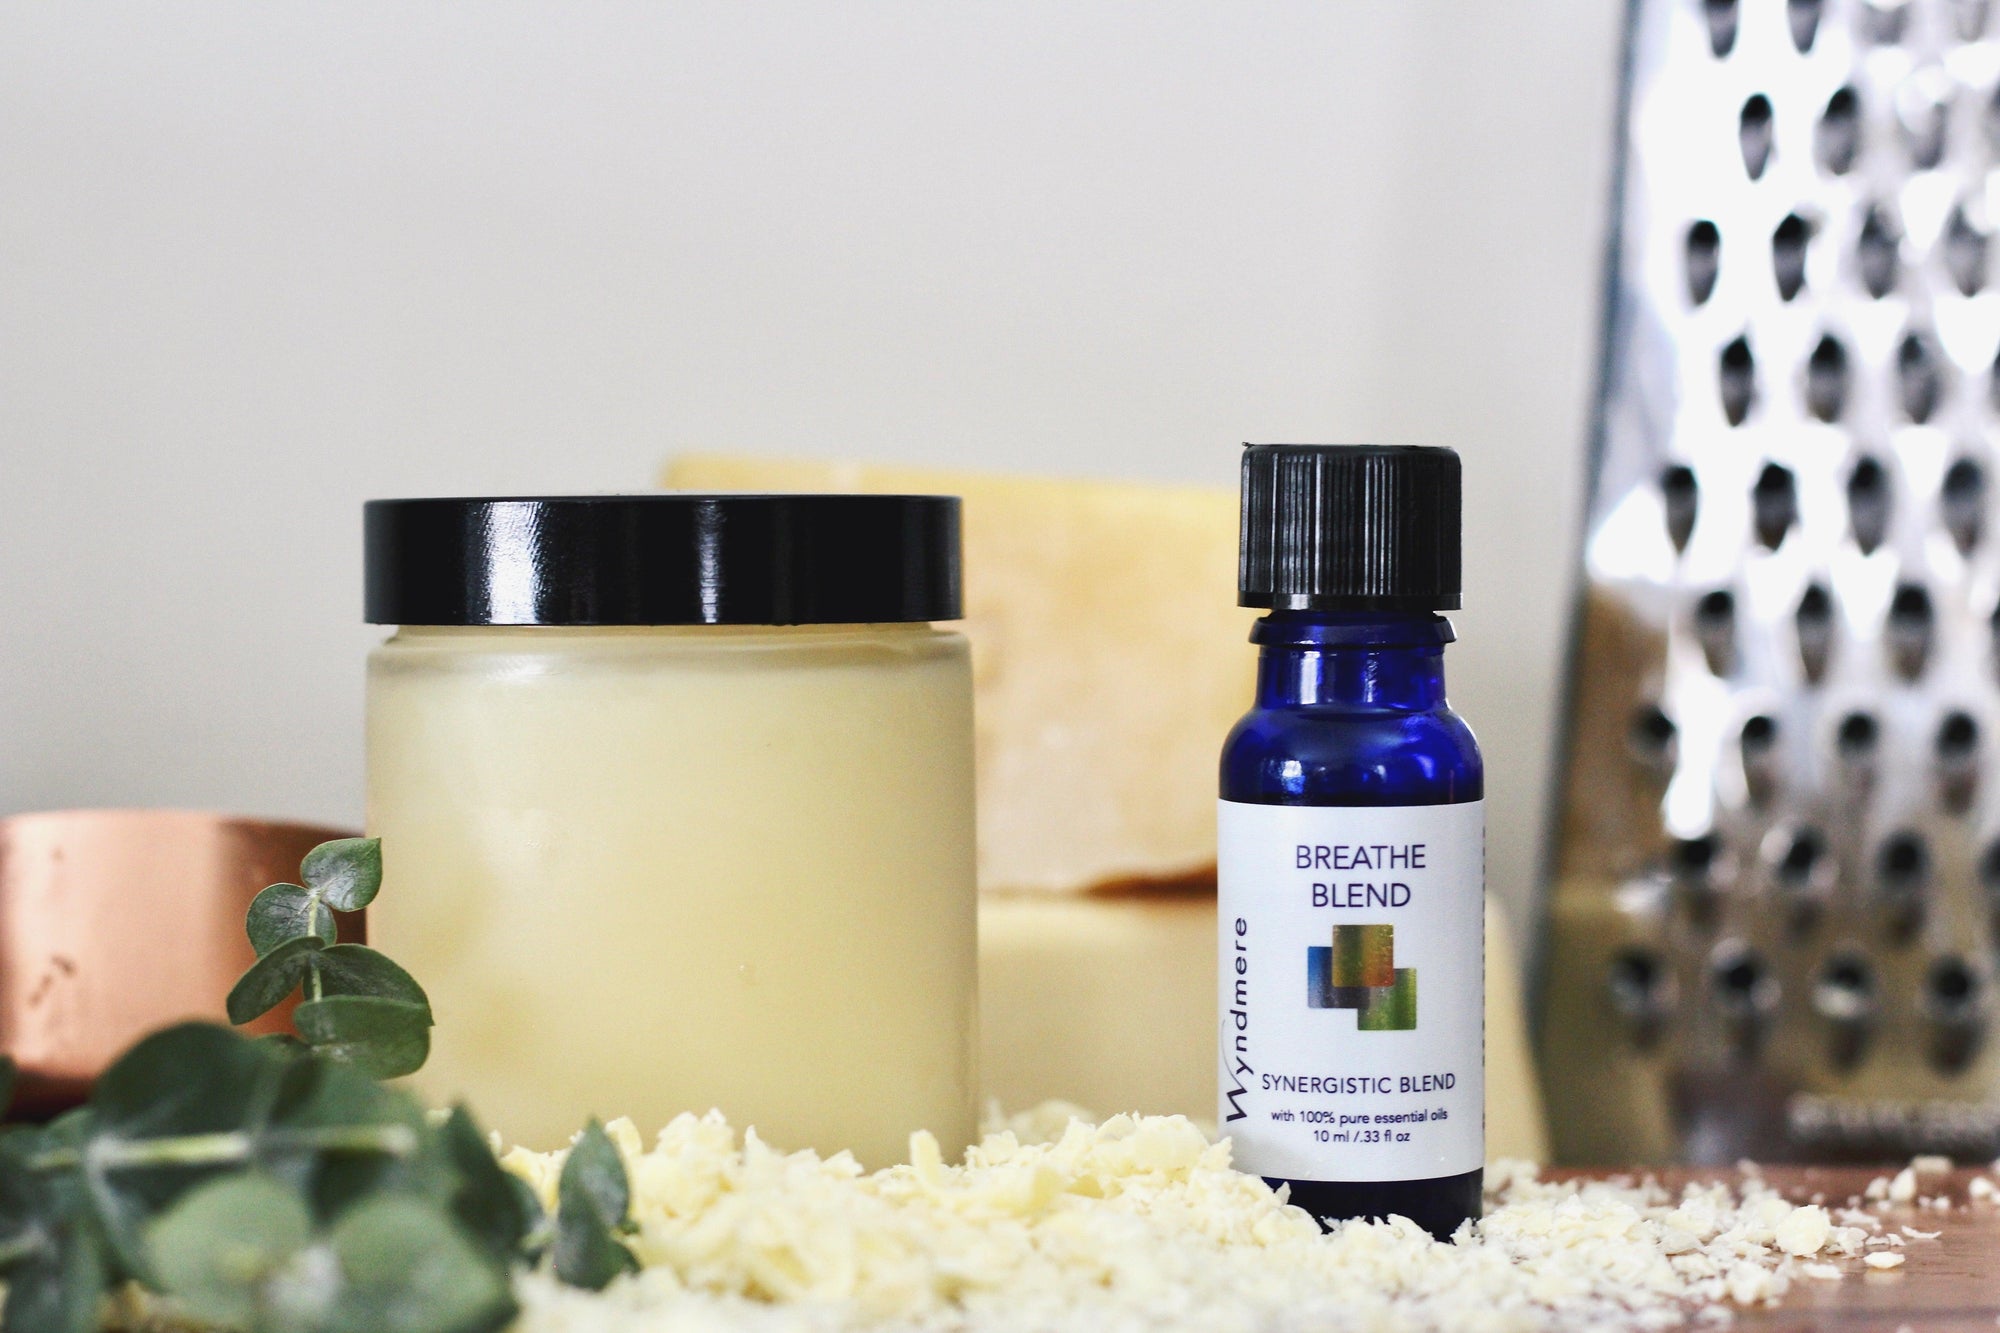 Vapor chest rub using essential oils and beeswax